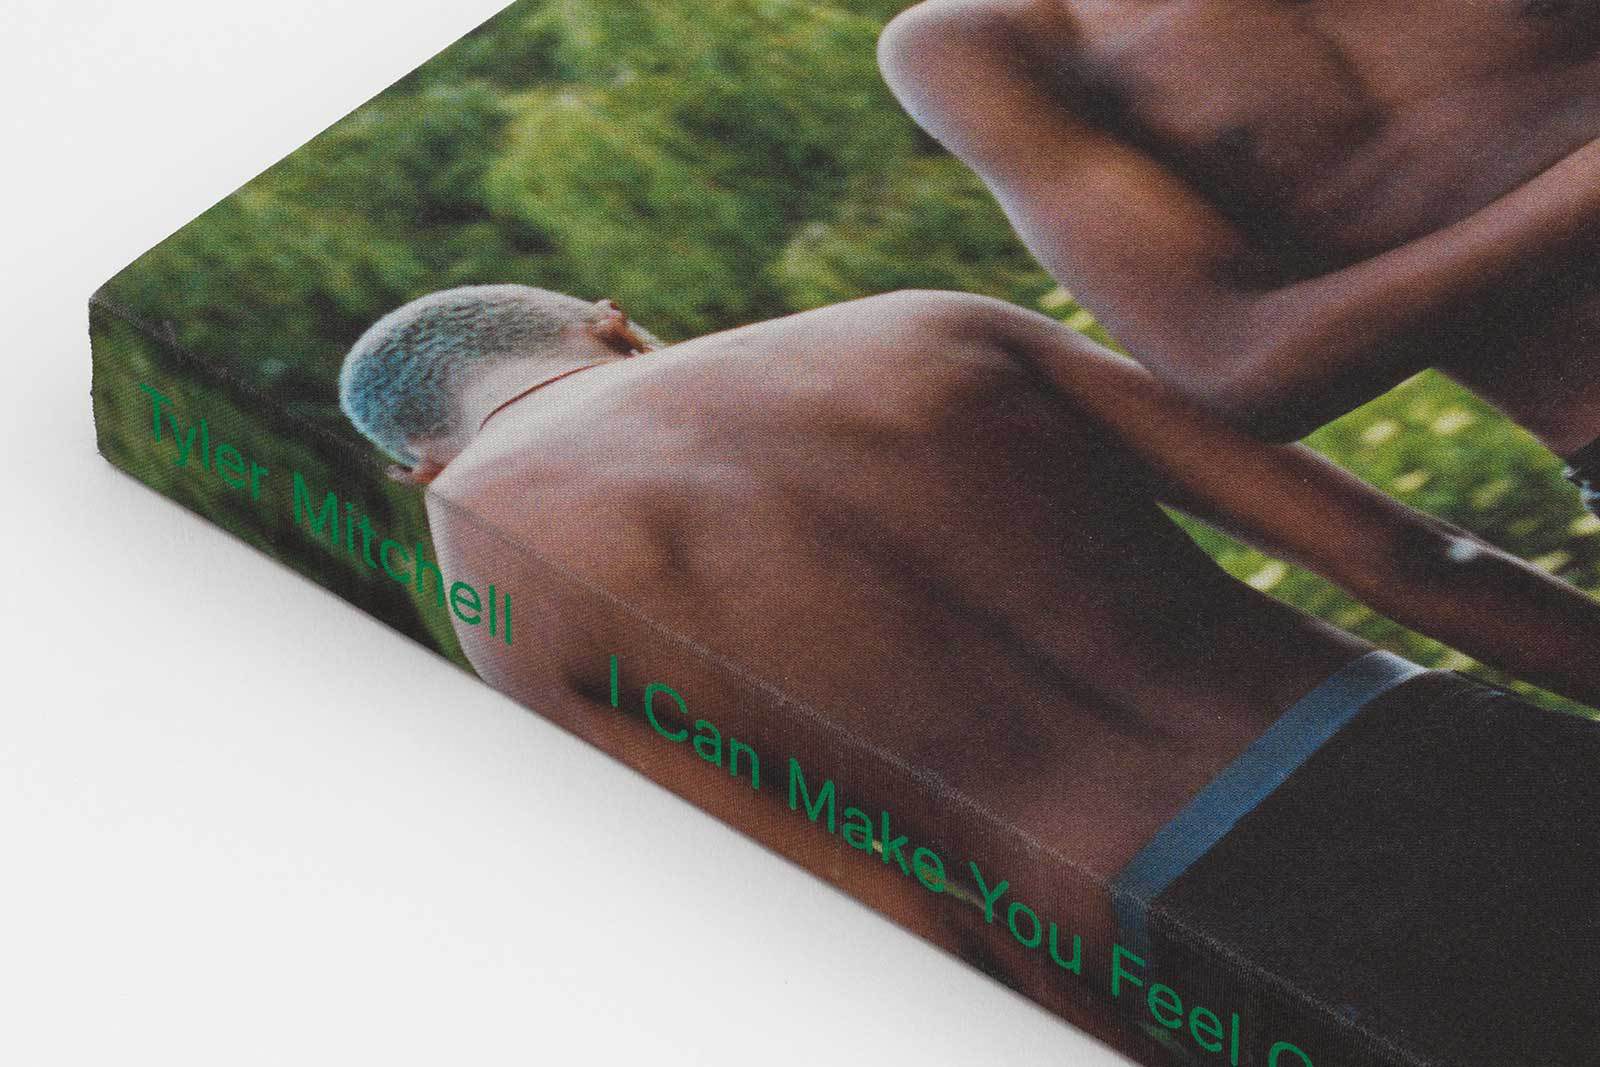 I Can Make You Feel Good. A book by photographer Tyler Mitchell with design by Studio Lin and an opinion from Richard Baird